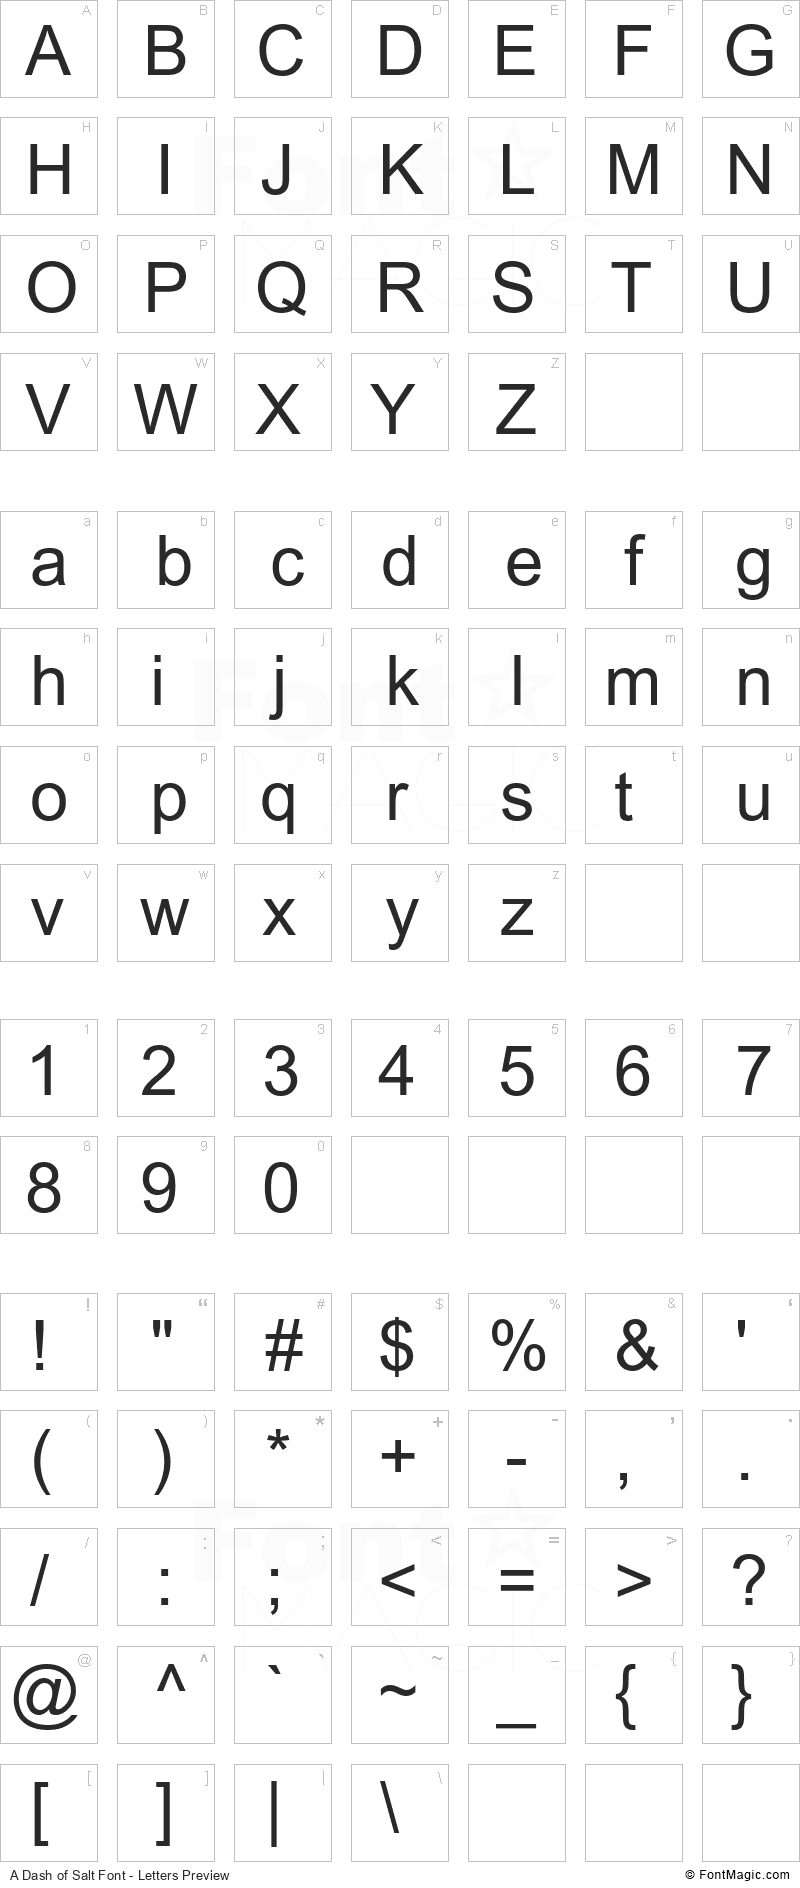 A Dash of Salt Font - All Latters Preview Chart